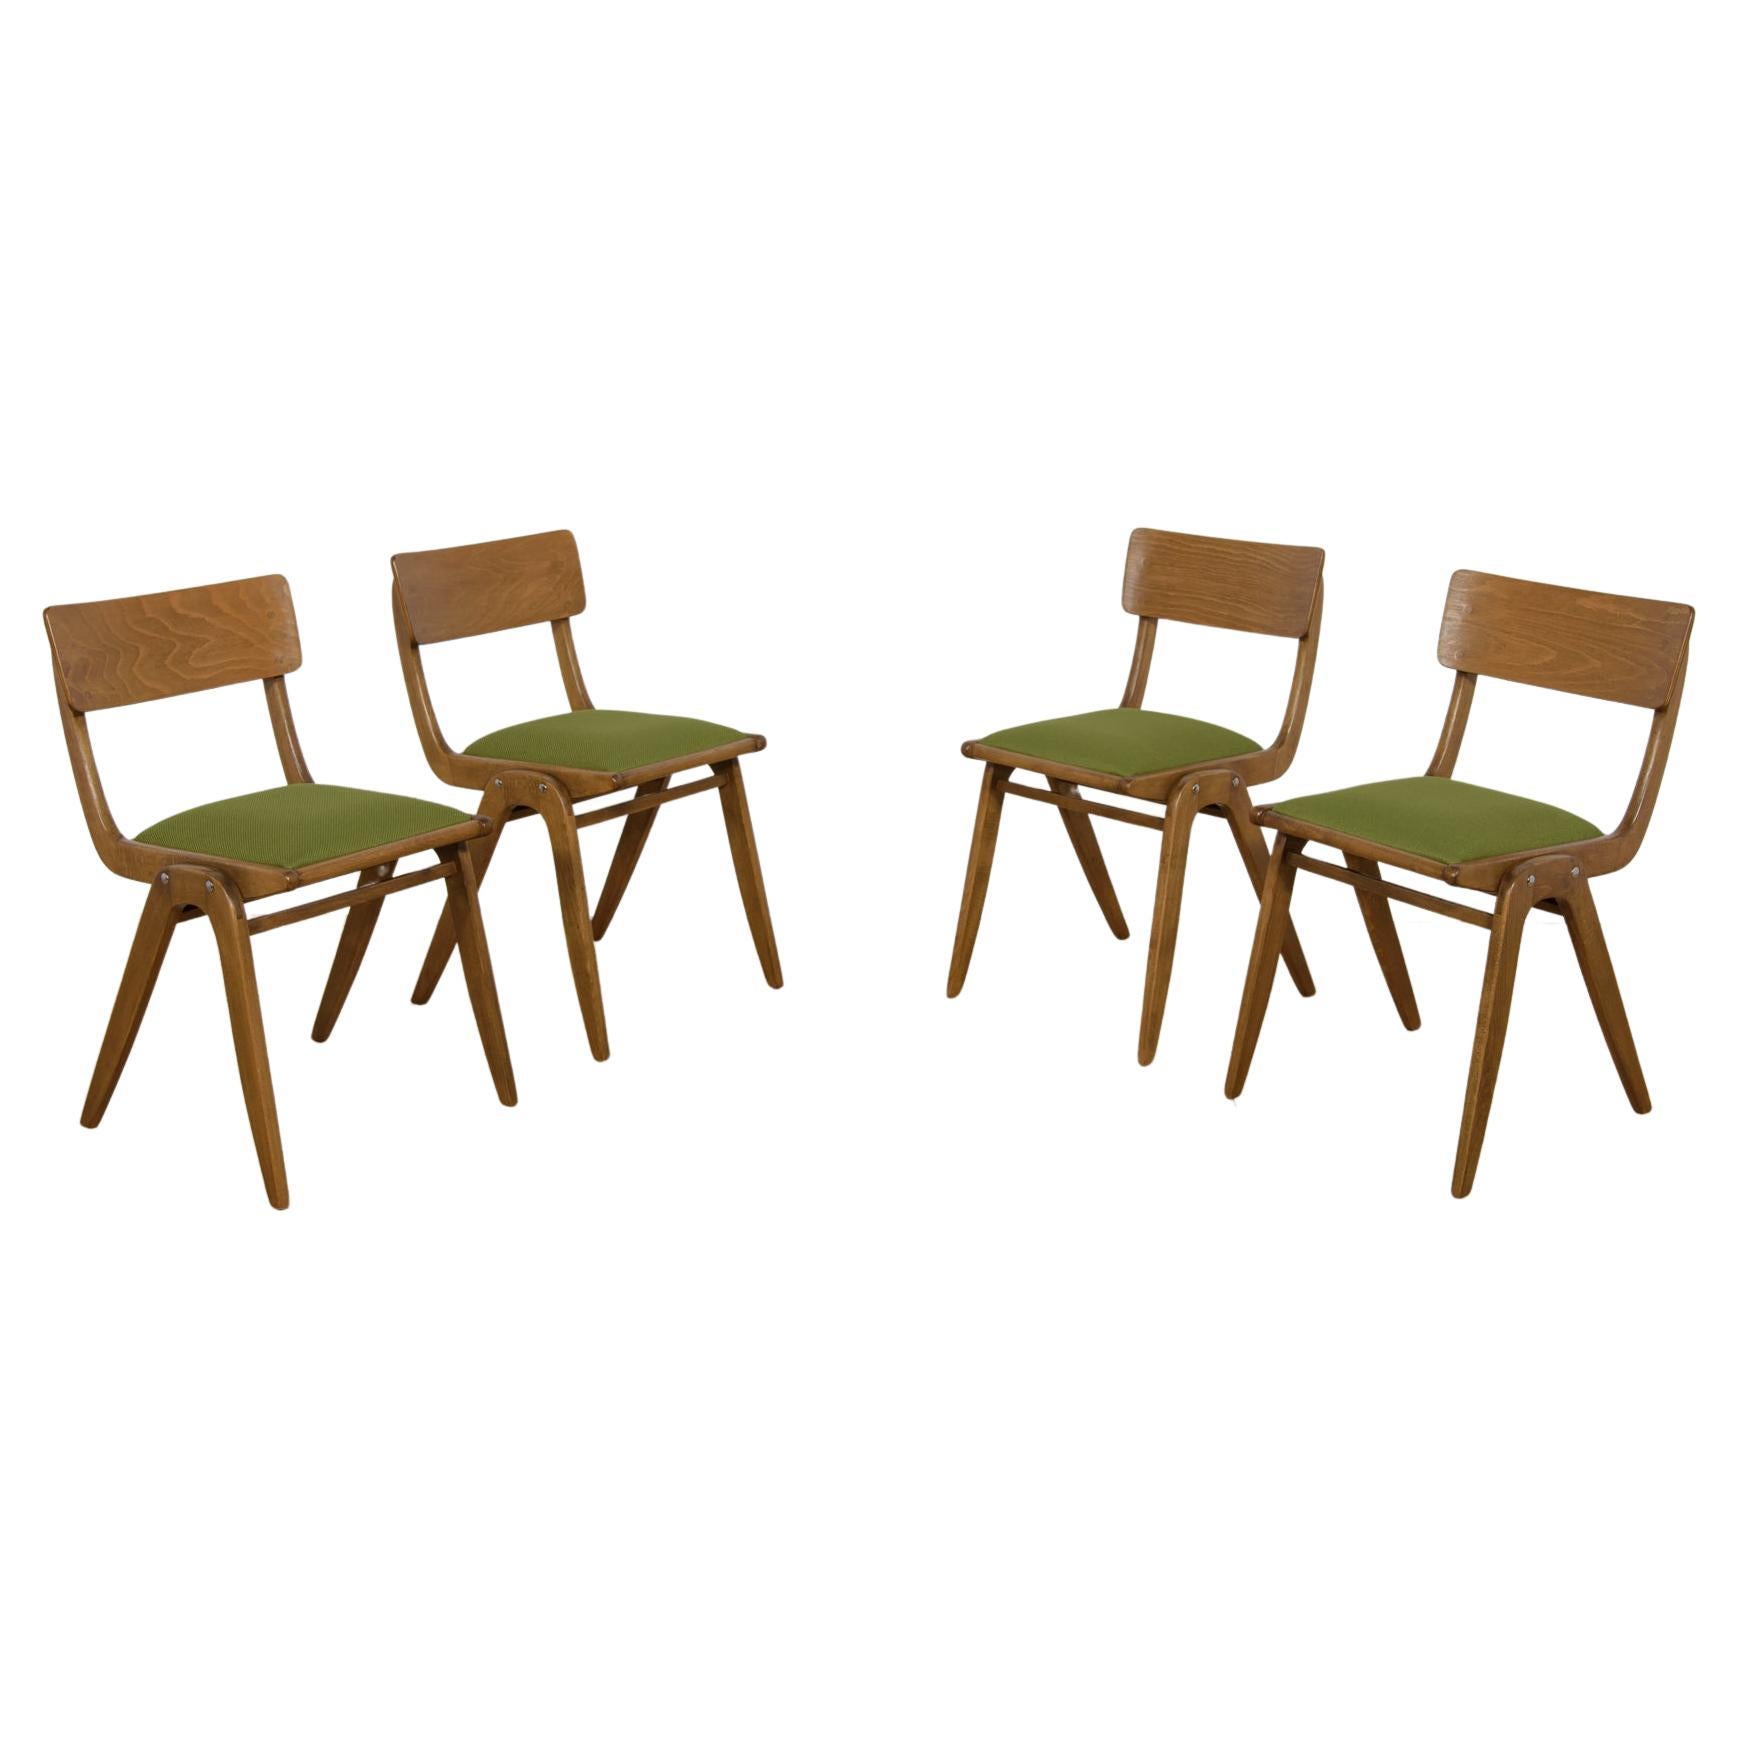 Boomerang Dining Chairs Typ 229xB from Goscinski Furniture Factory, 1960s. For Sale